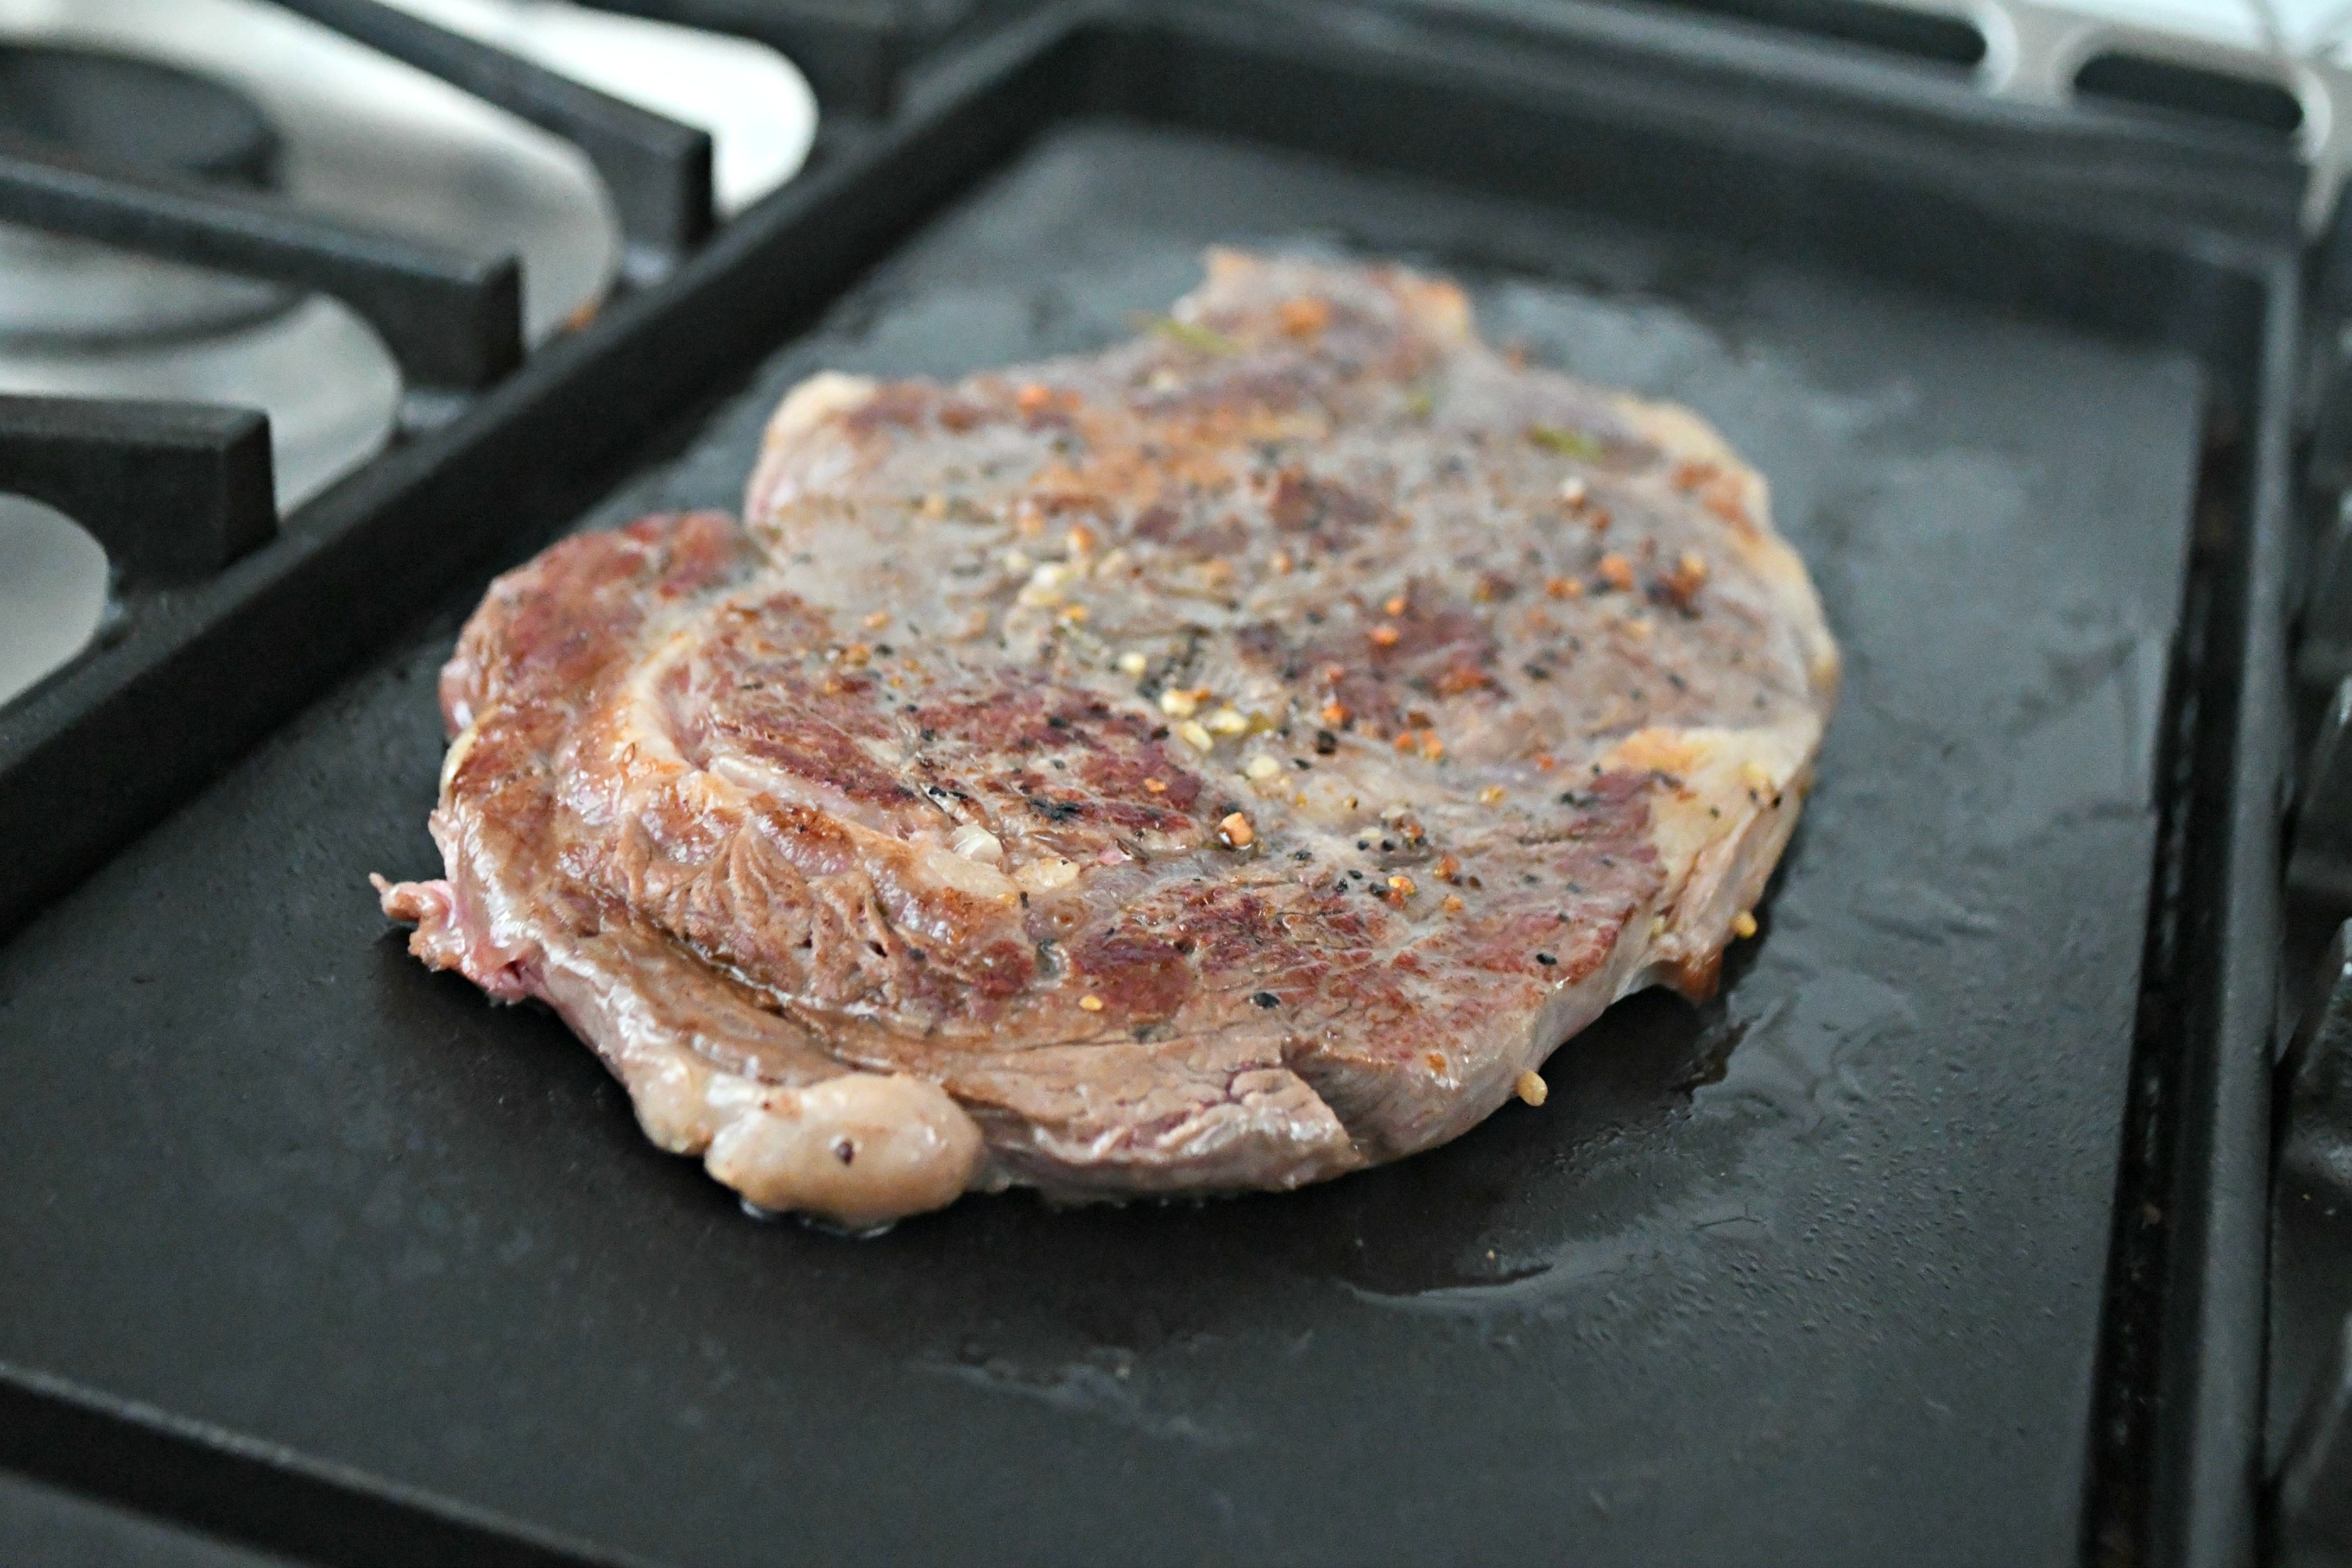 Make the Best Steak Using the Sous Vide method and then sear the steak to finish